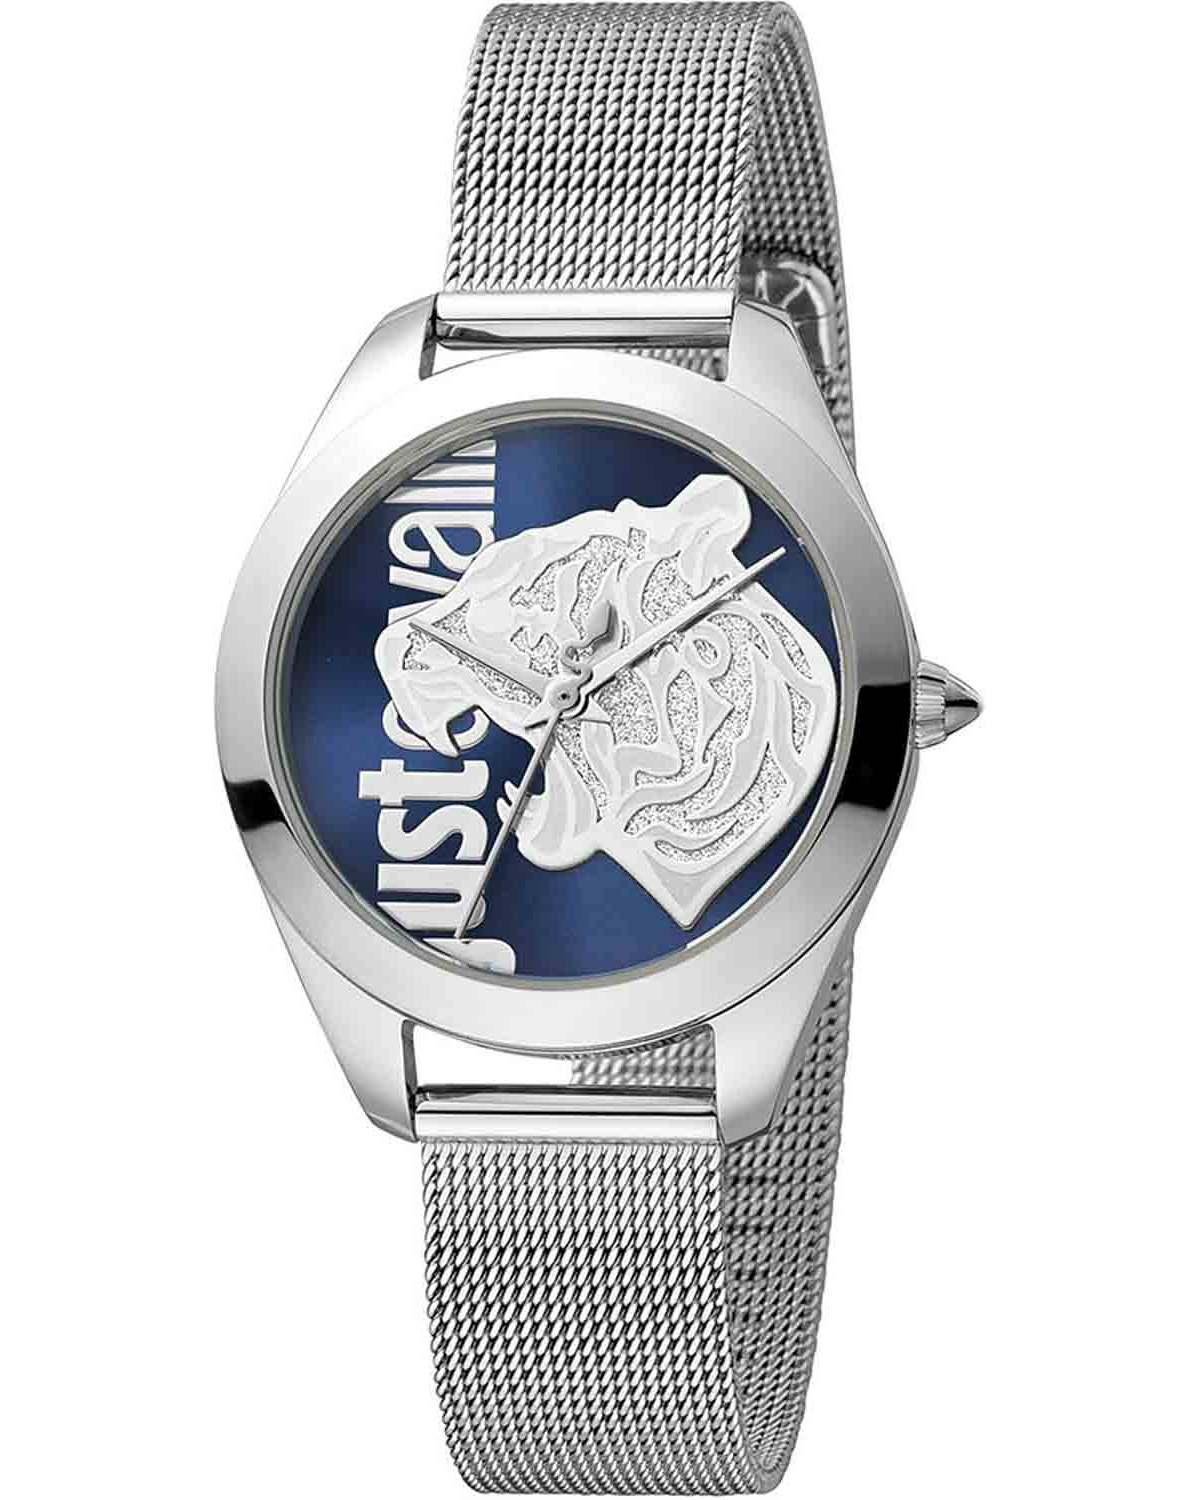 JUST CAVALLI Animalier - JC1L210M0035, Silver case with Stainless Steel Bracelet